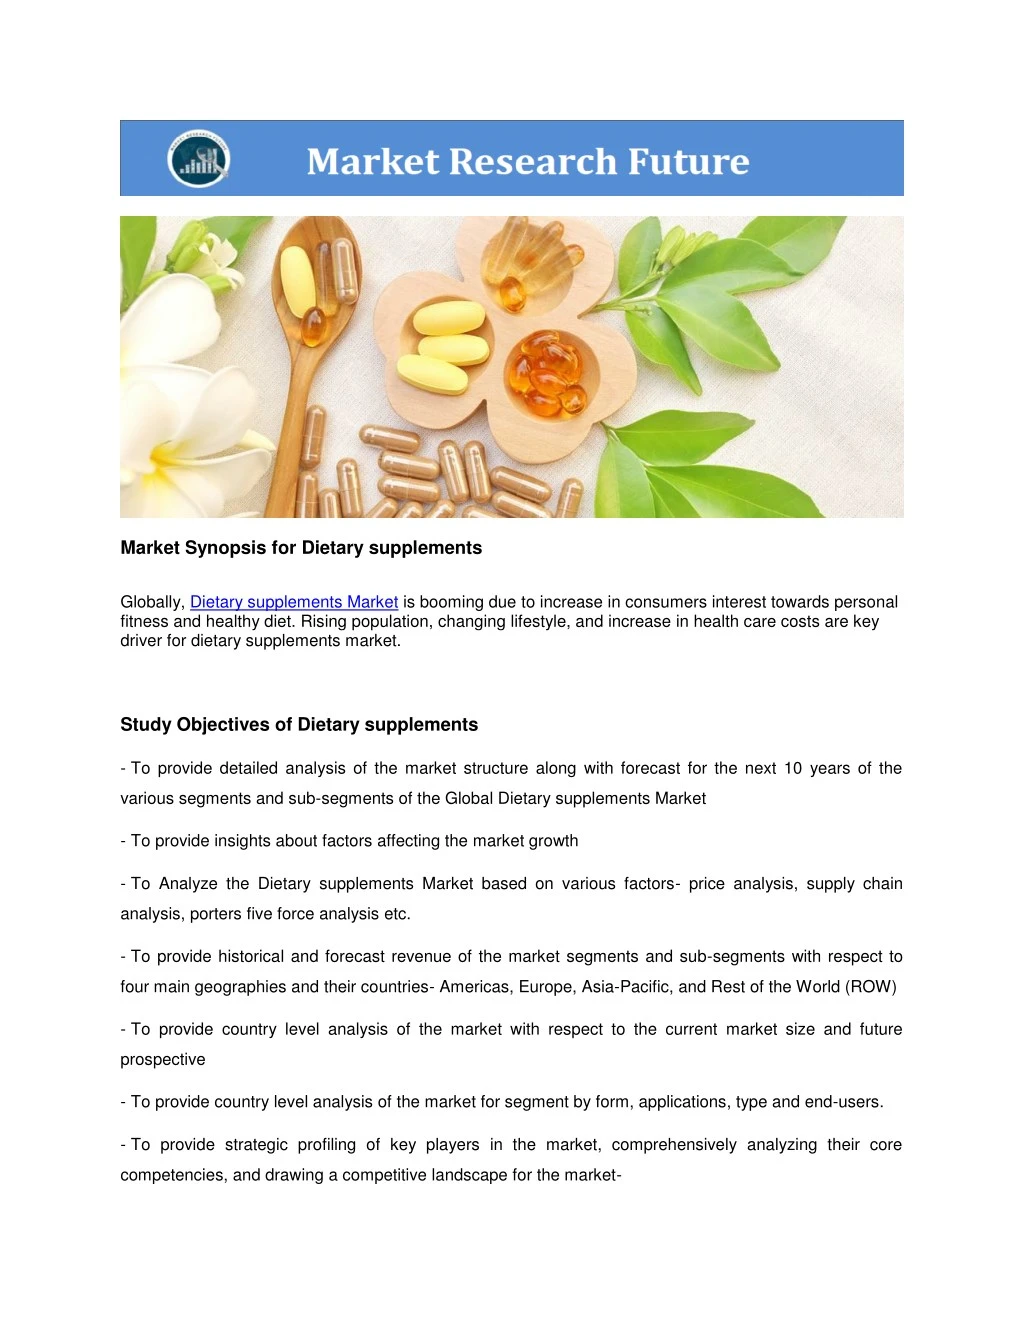 market synopsis for dietary supplements